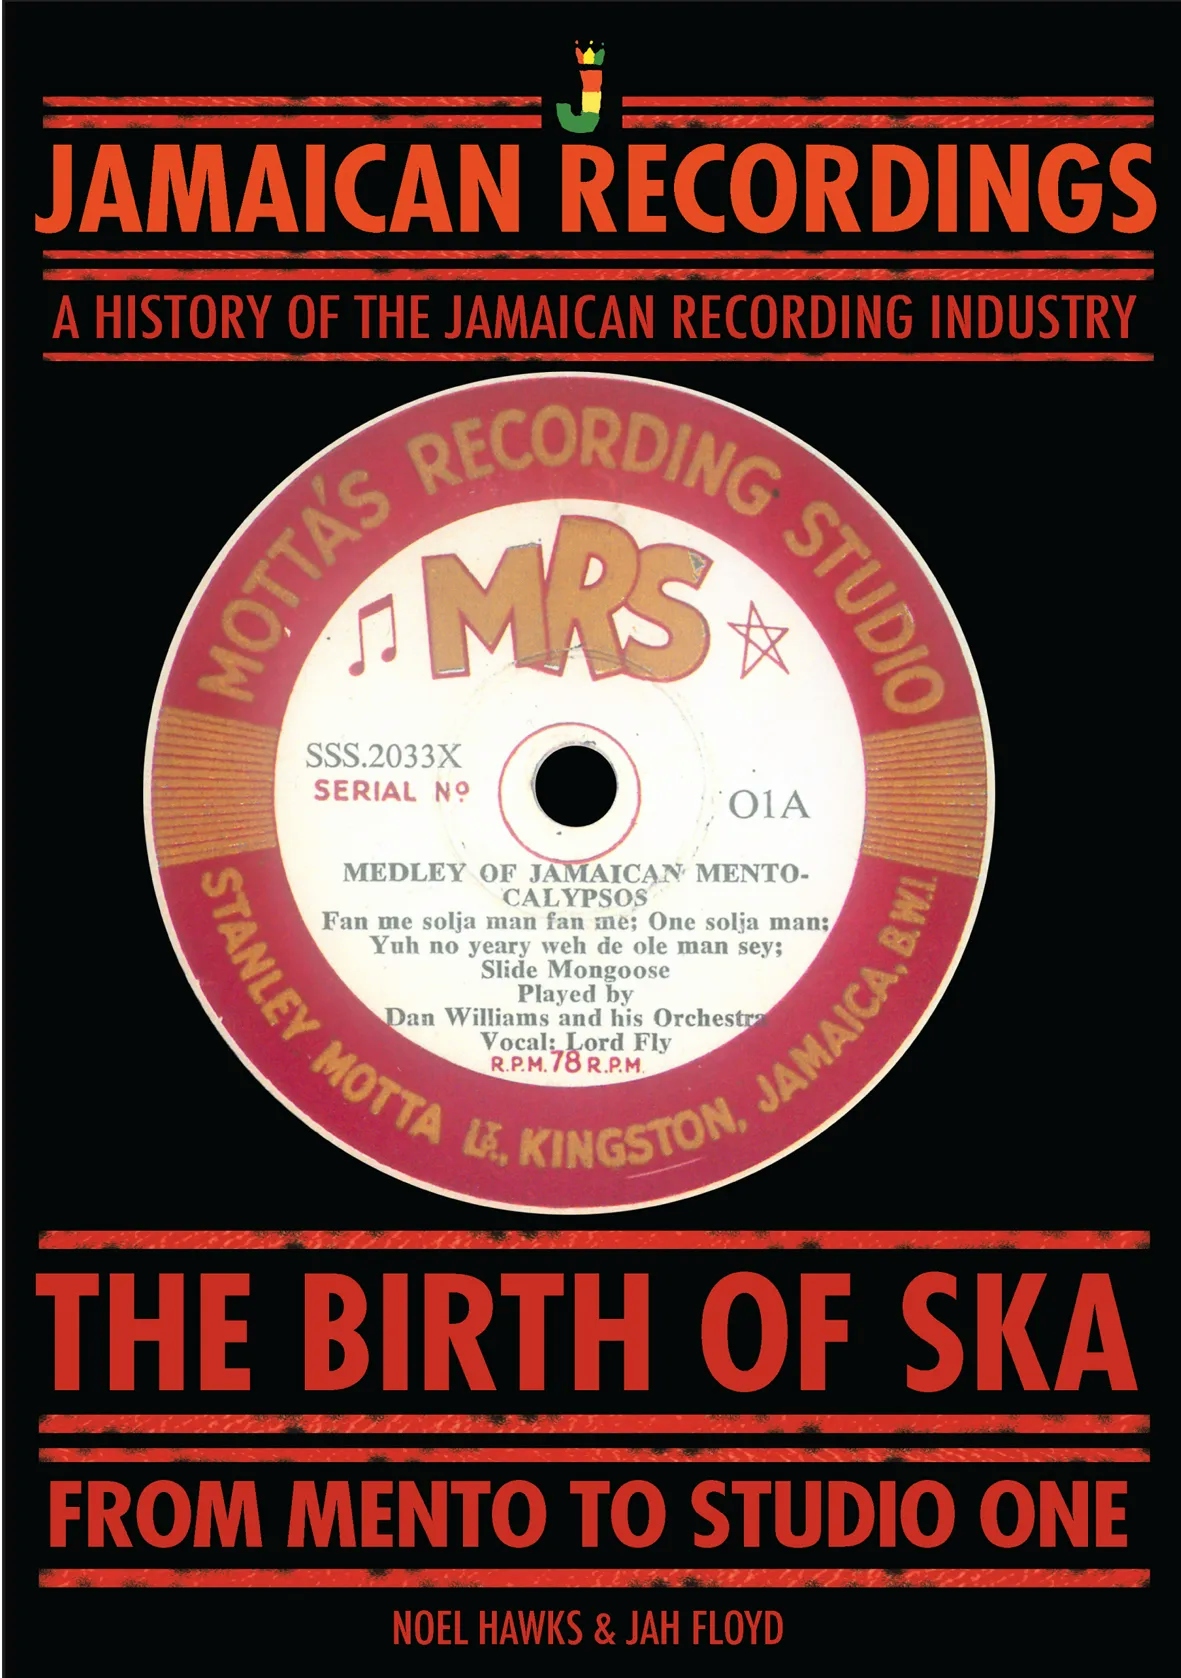 Album artwork for The Birth of Ska - From Mento to Studio One by Noel Hawks and Jah Floyd